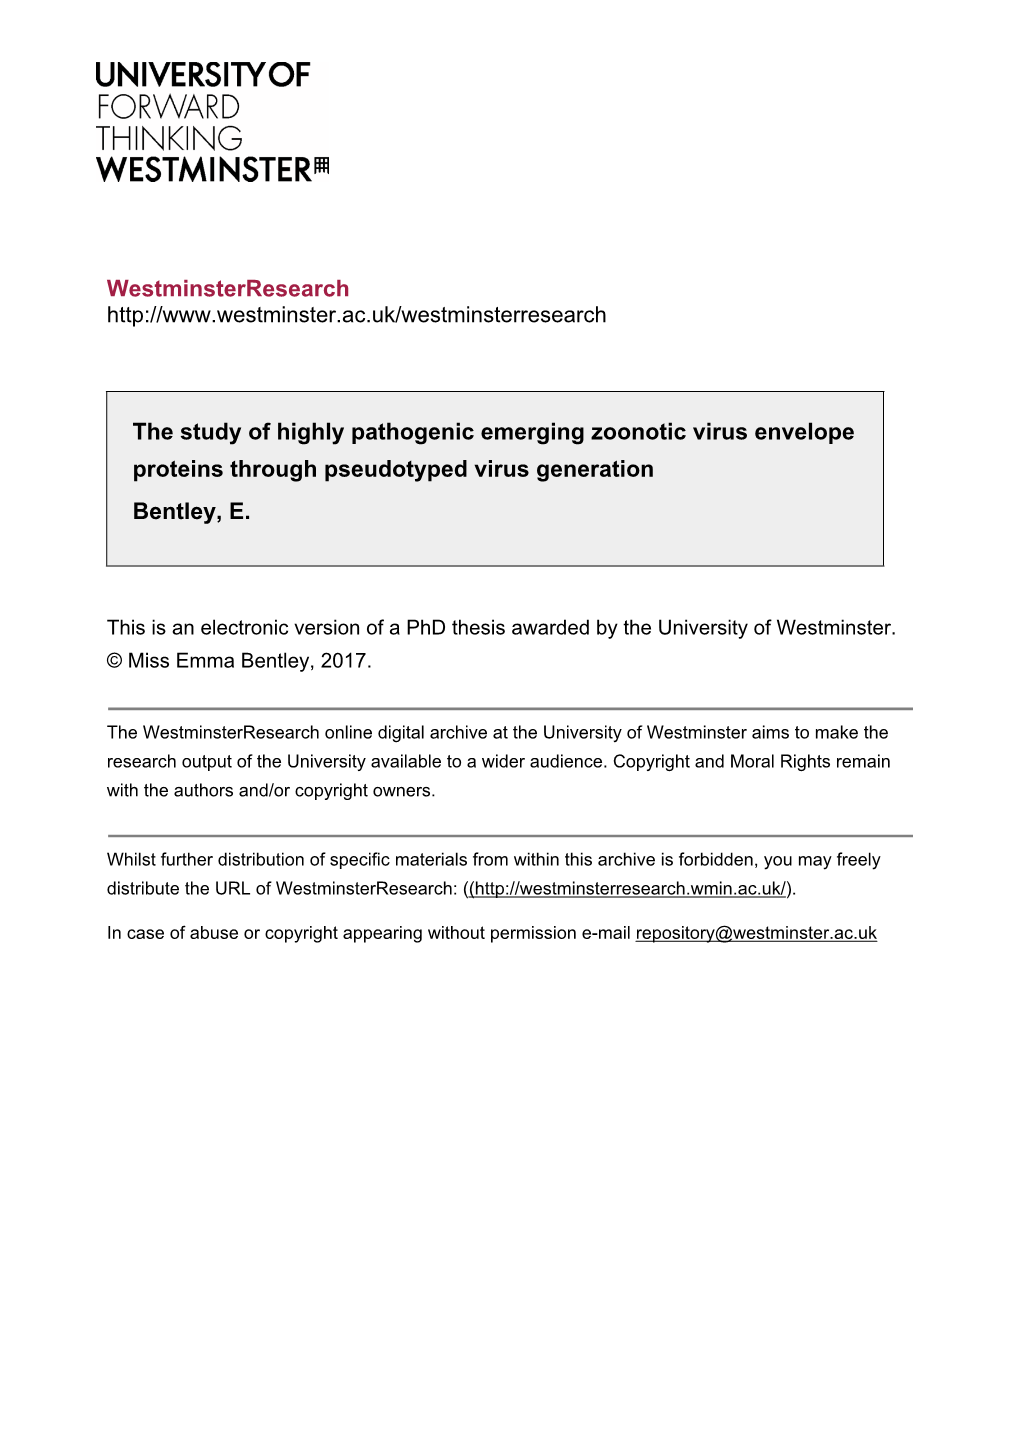 Westminsterresearch the Study of Highly Pathogenic Emerging